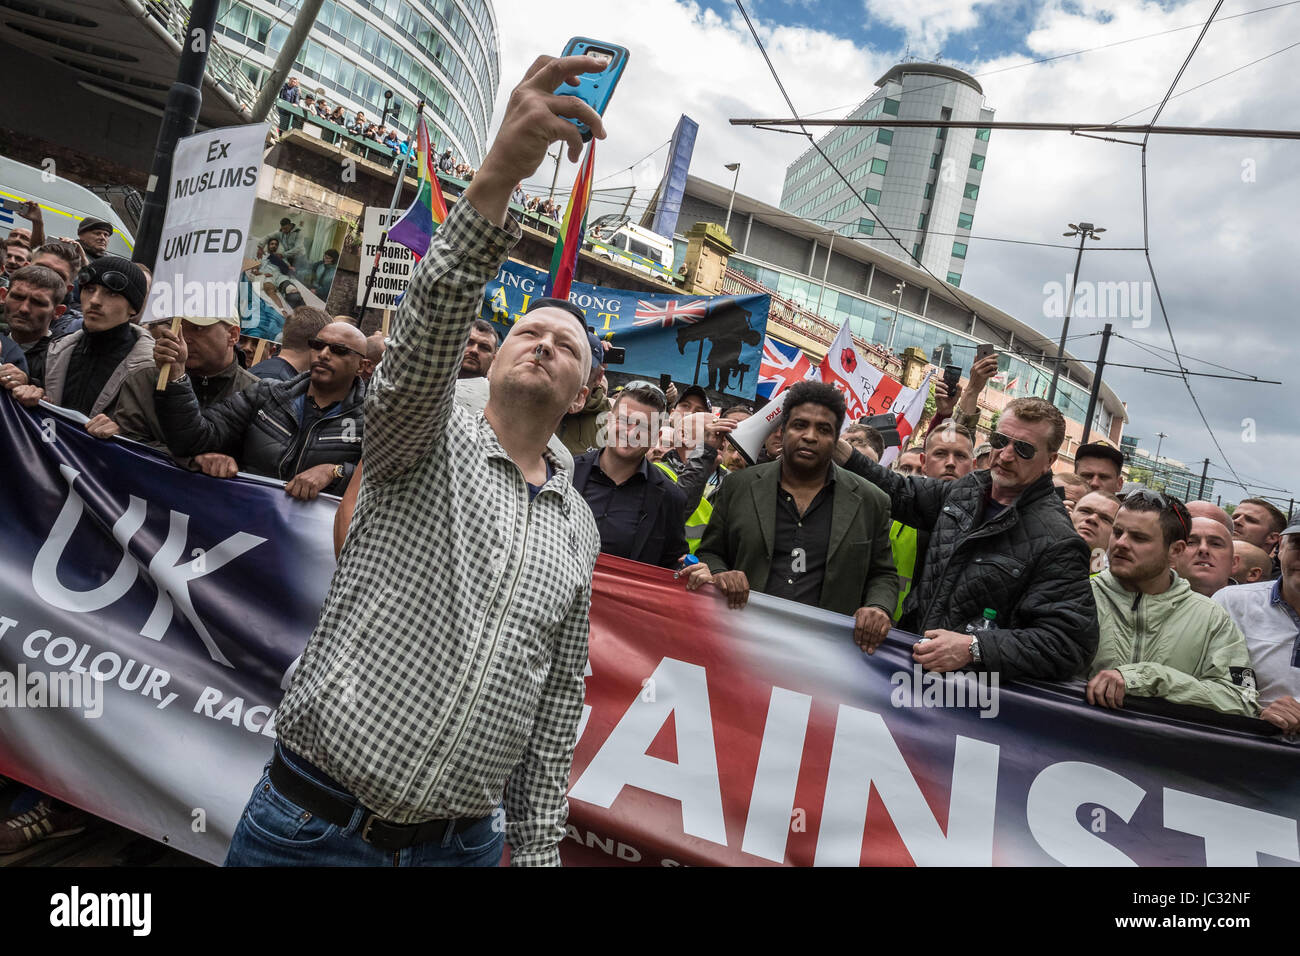 About 1,000 attend right-wing ‘Unite Against Hate' anti-Islamic march and rally lead by Tommy Robinson in Manchester city centre, UK. Stock Photo